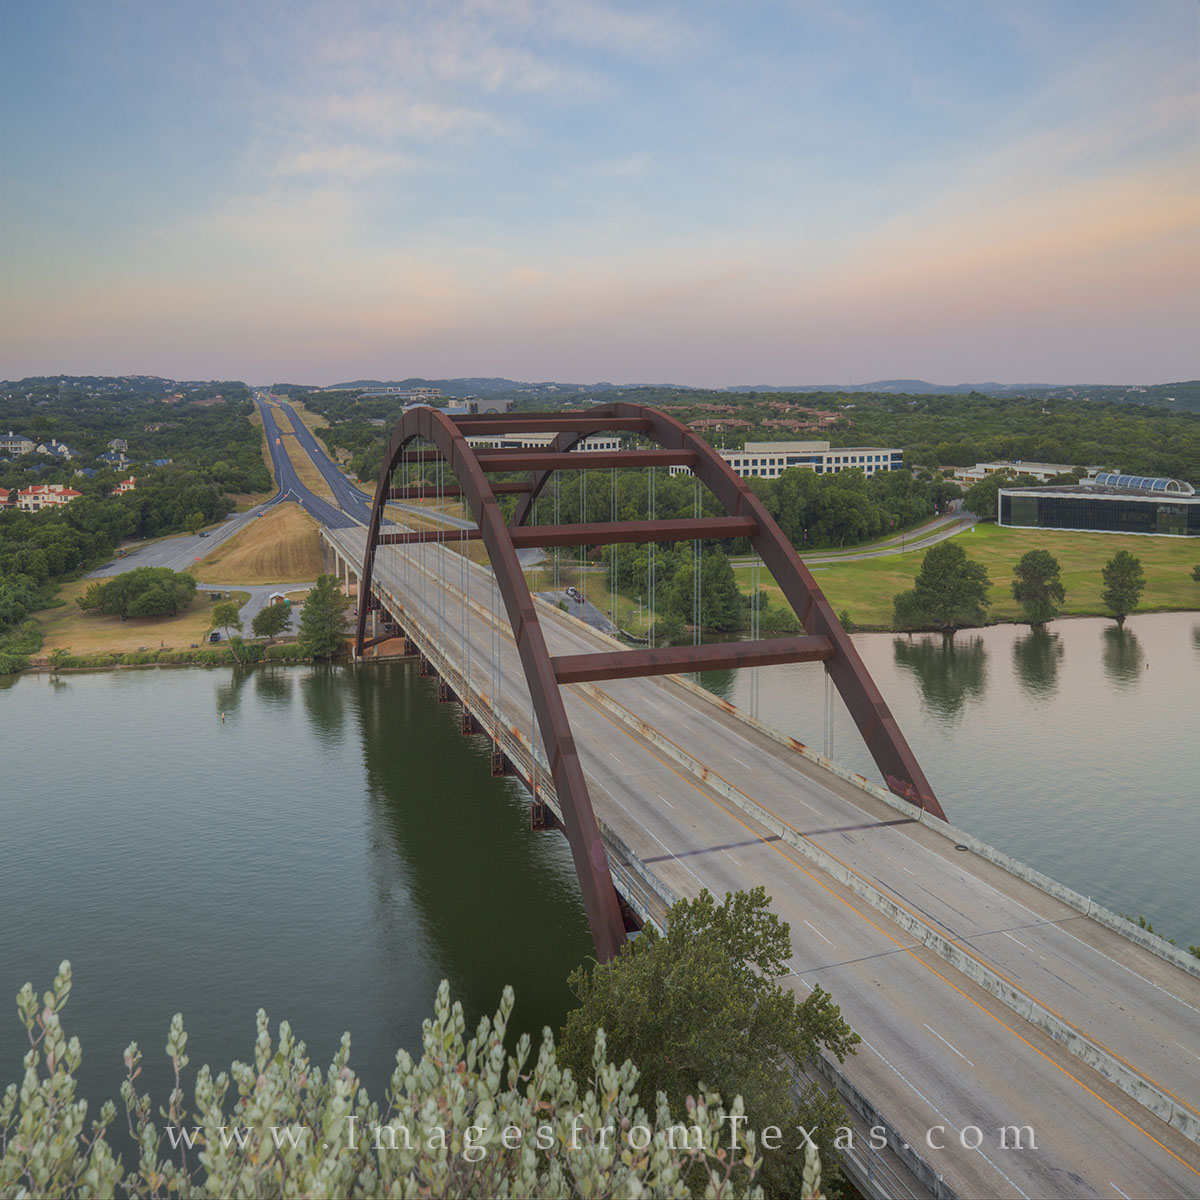 Pennybacker Bridge, also known as the 360 Bridge, is an Austin icon. Seen here on a warm July morning, the bridge spans the Texas...